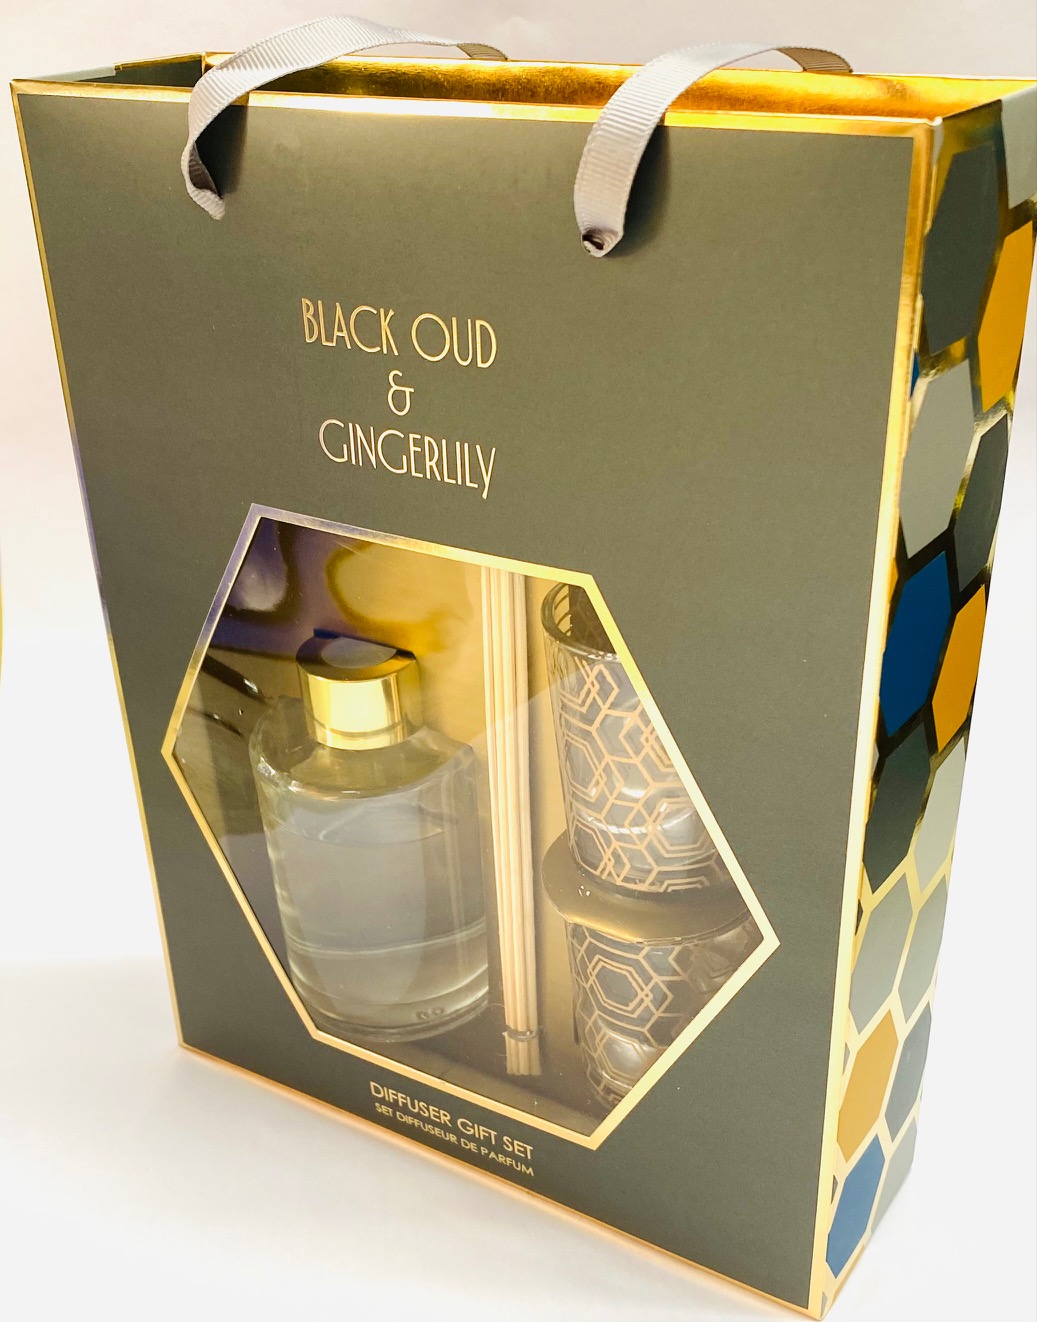 Black OUD & Gingerlilly Reed Diffuser Set in a Gift Box